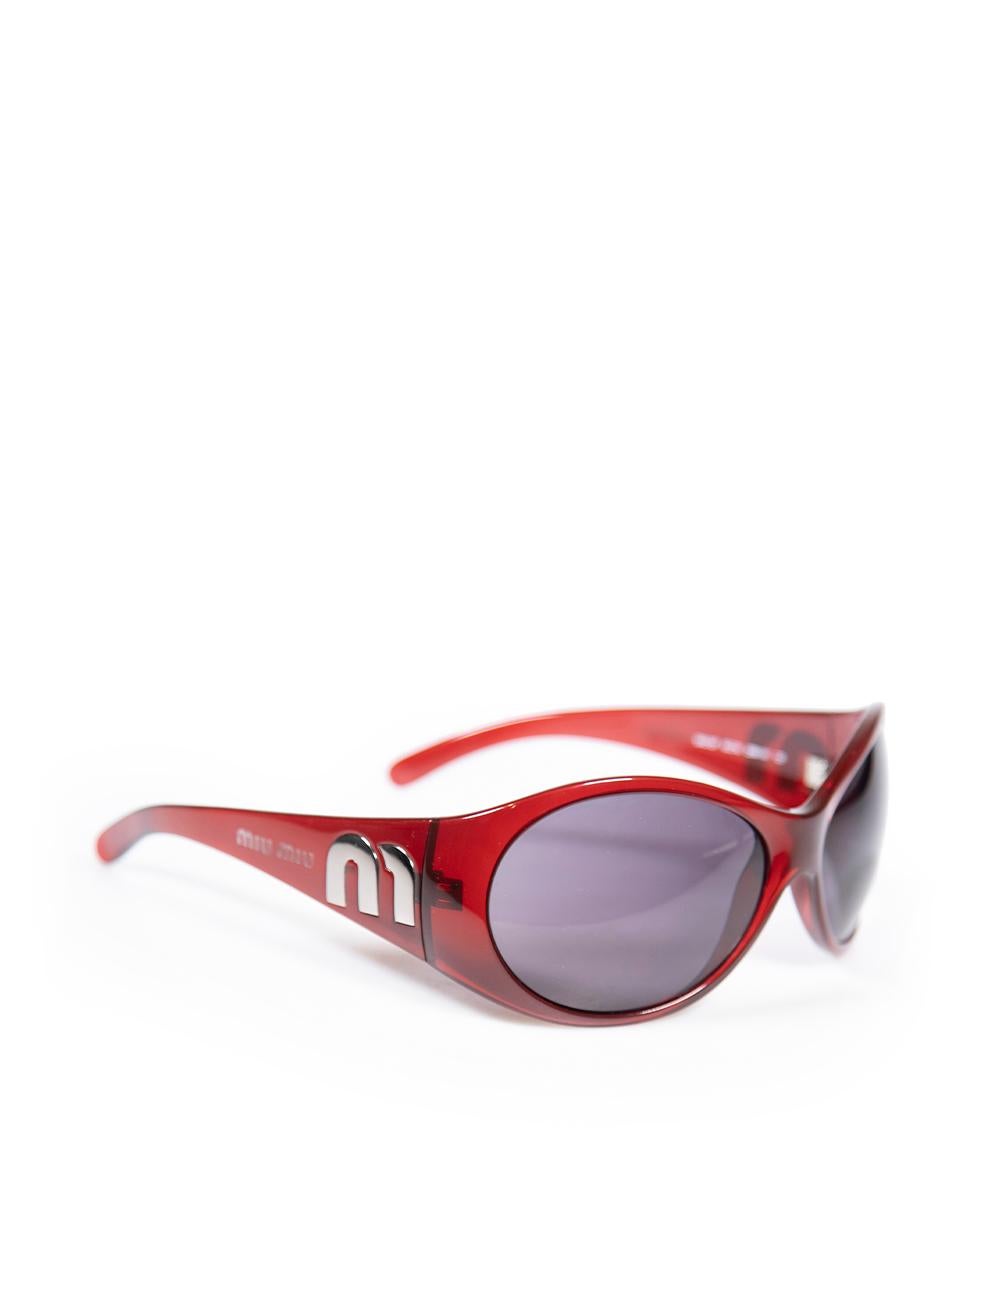 CONDITION is Very good. Hardly any visible wear to sunglasses is evident on this used Miu Miu designer resale item. This item comes with original case and lens cloth.
 
 
 
 Details
 
 
 Red
 
 Plastic
 
 Oversized round sunglasses
 
 Logo detail on